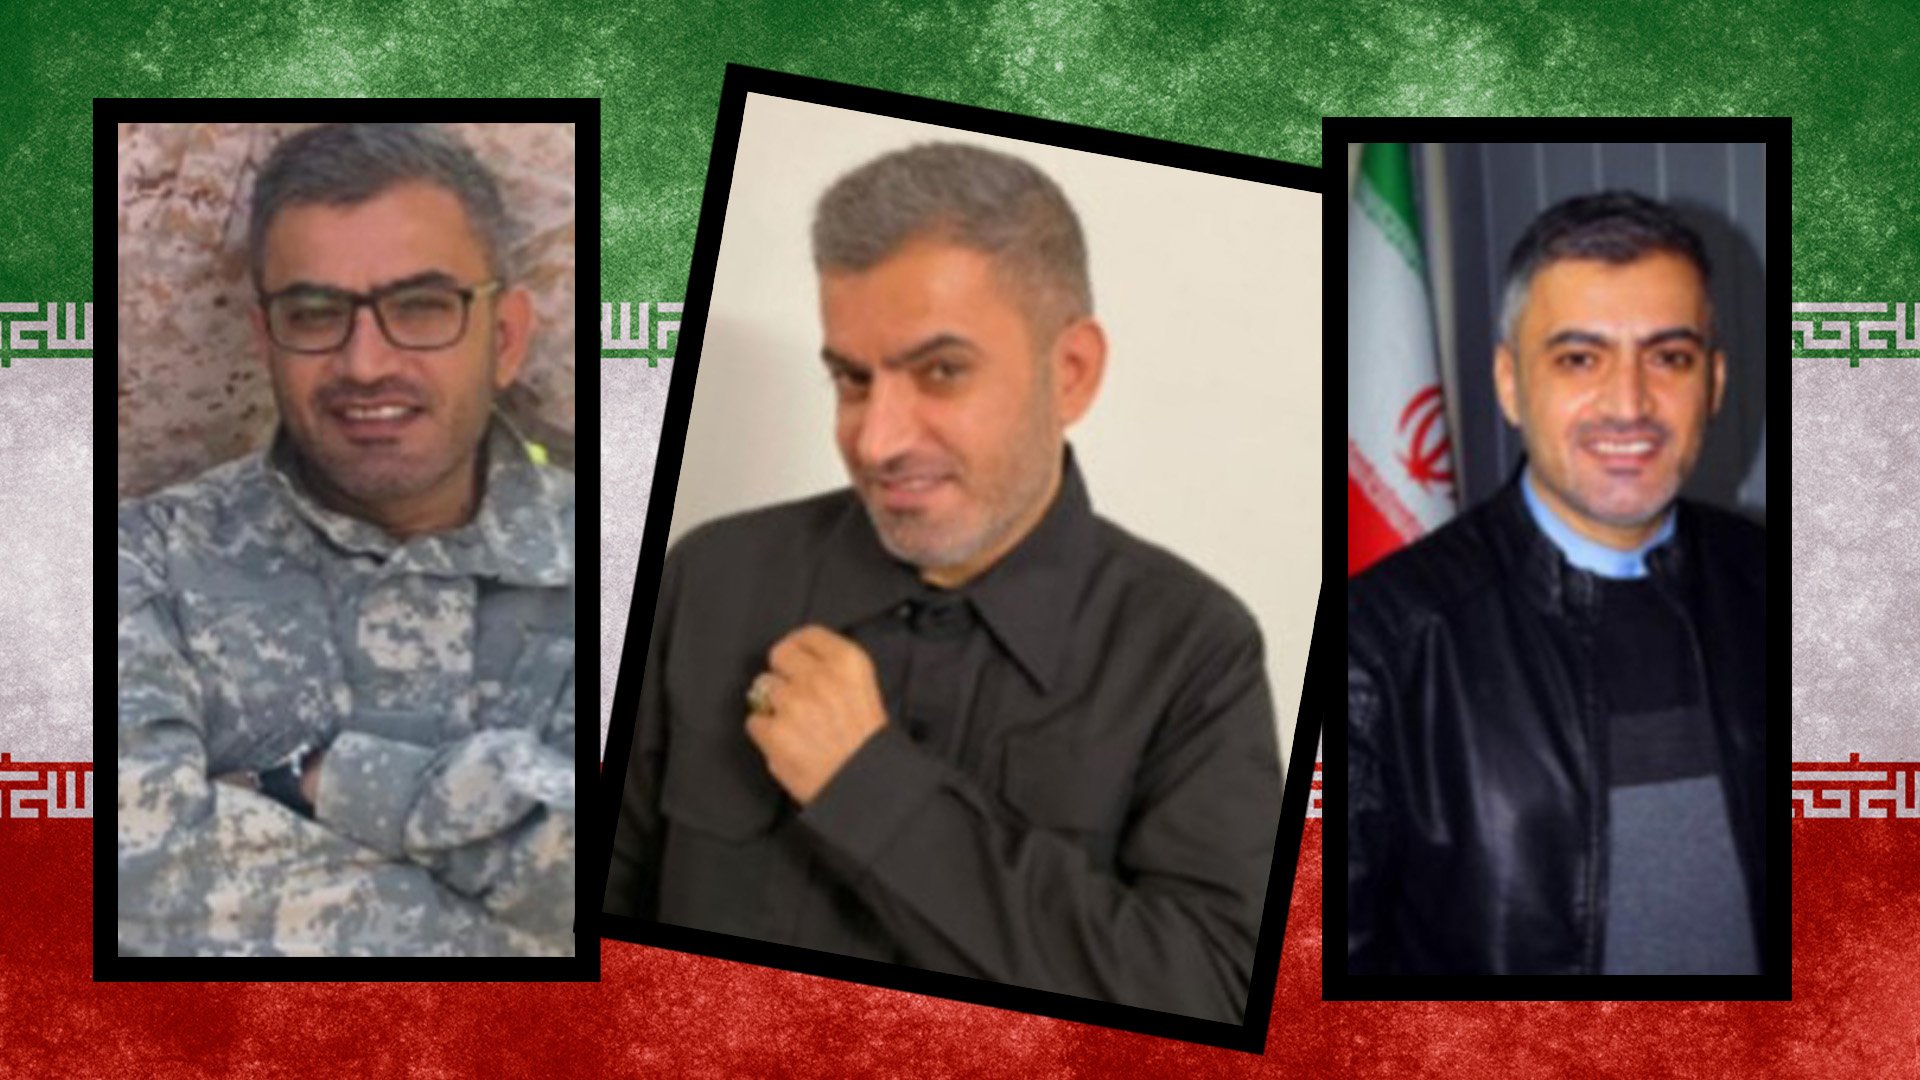 The US Department of Justice says the Iranian man in these three photos, Shahram Poursafi, tried to hire a hitman to kill President Donald Trump's former National Security Advisor, John Bolton. Coffee or Die Magazine composite.